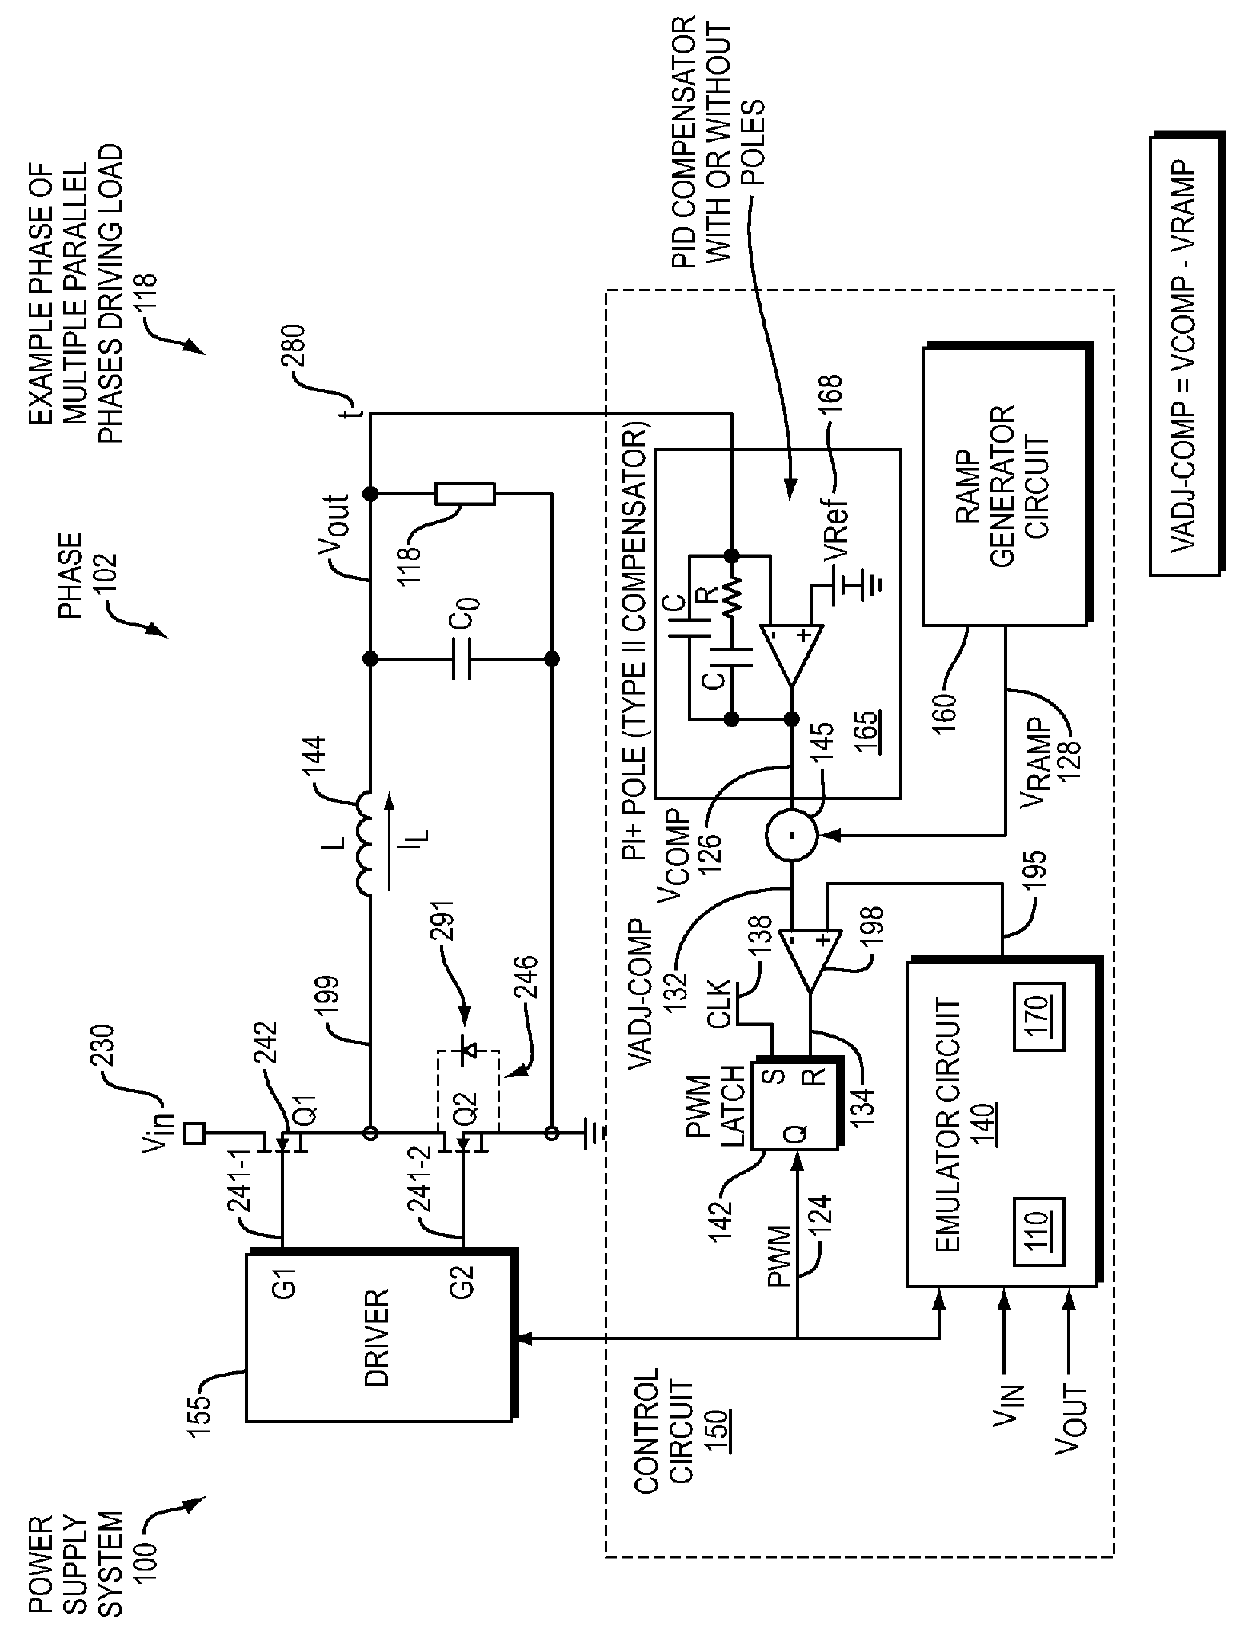 Power supply control and current emulation